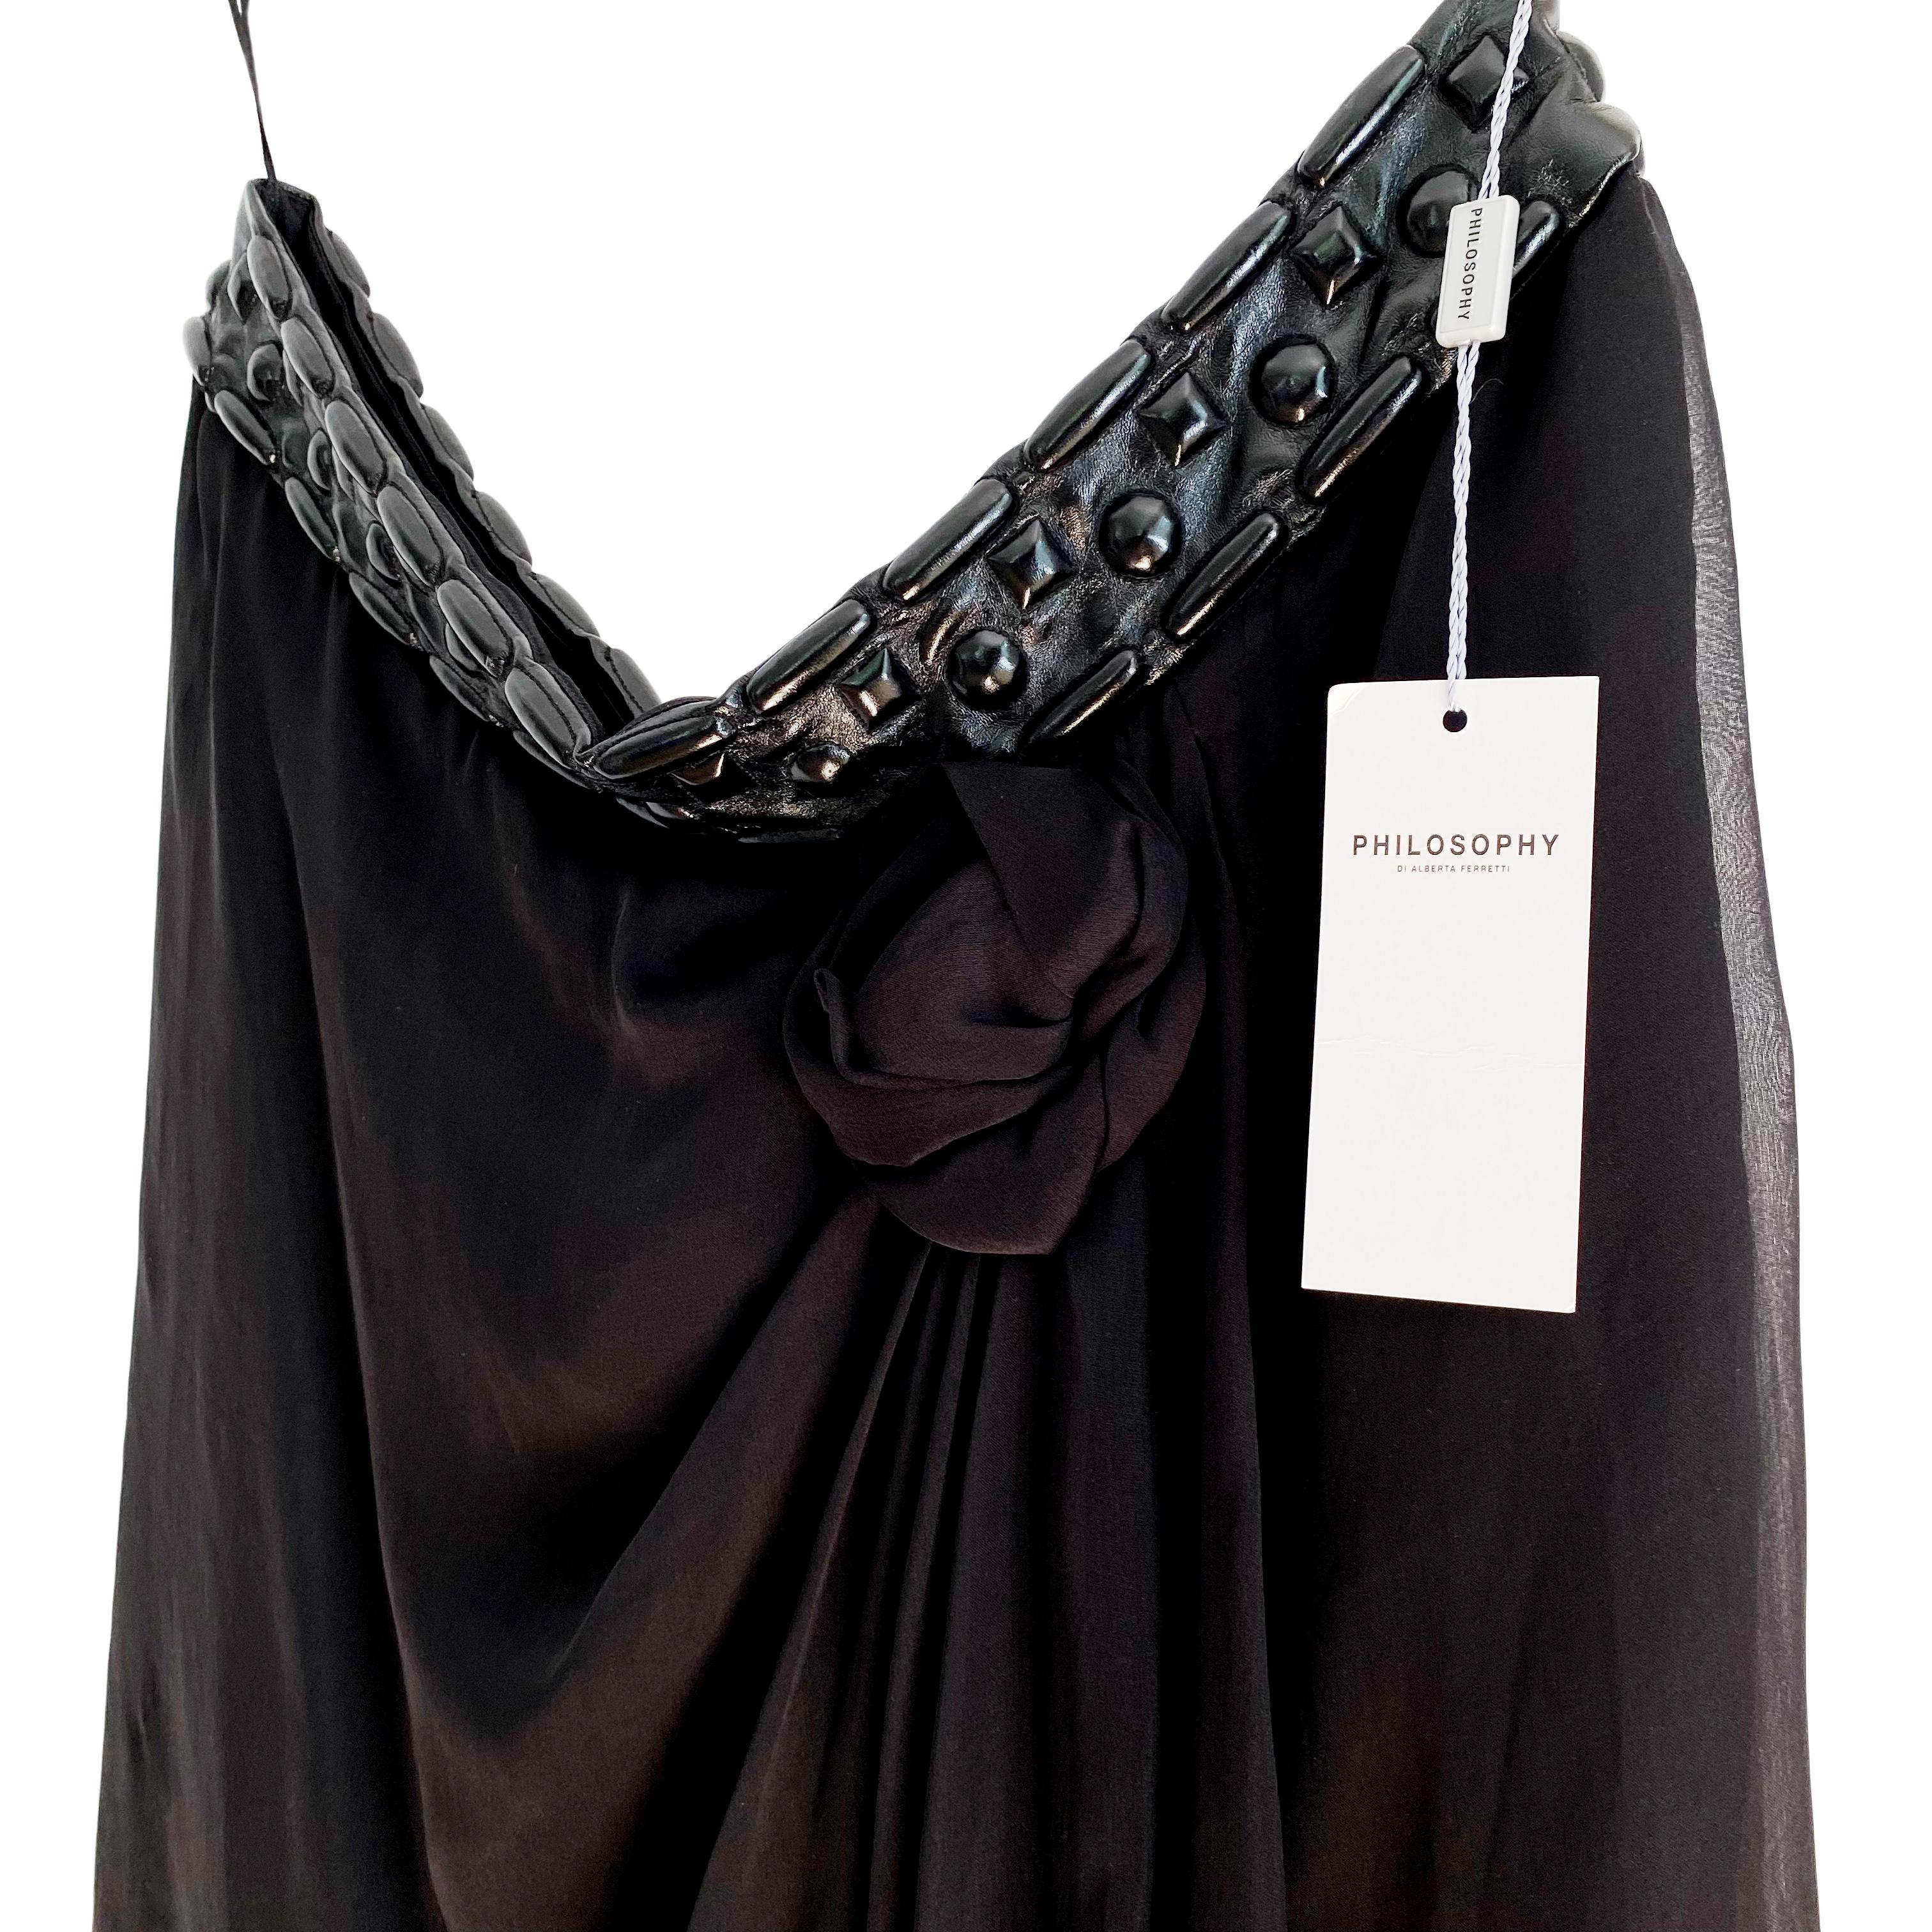 Pair with a simple top and let this embellished beautiful black silk skirt from Philosophy di Alberta Ferretti show off your fashion sense!
Leather-like contoured waistband. Invisible side zipper and hook/eye finish on left side.
Lined.
New with tag.